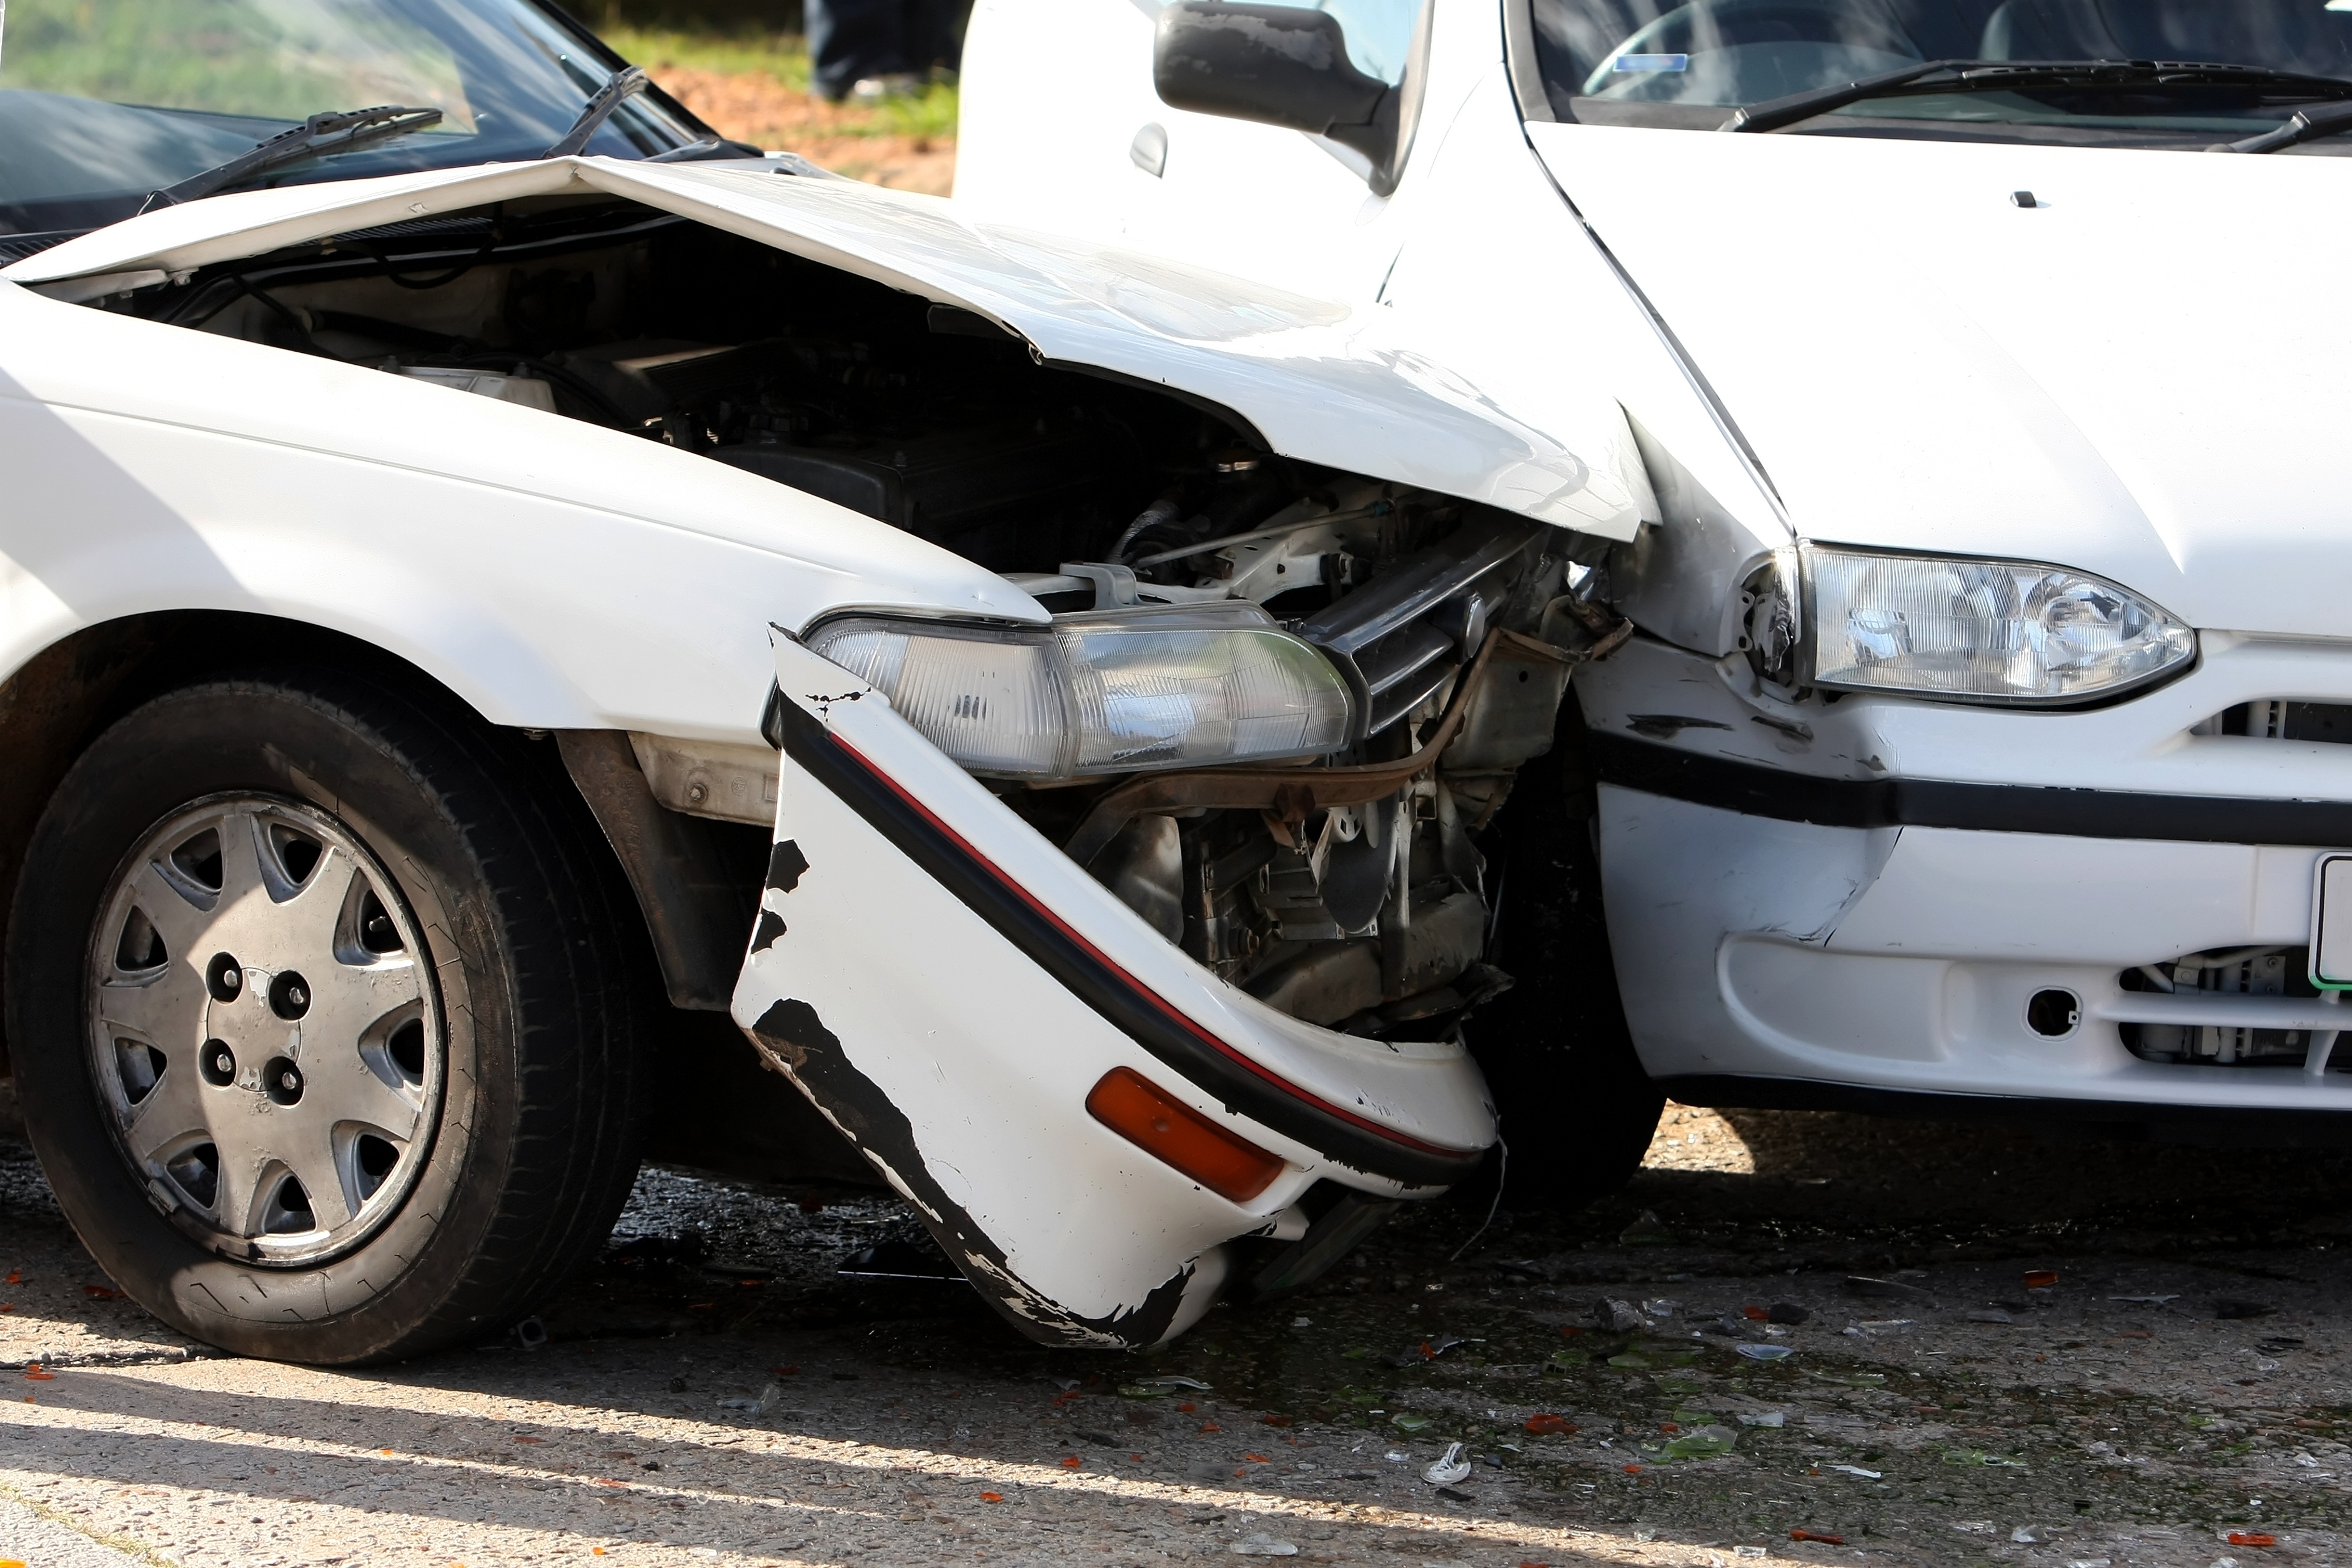 Two Cars in Crash - St Paul Car Accident Attorneys - Sand Law LLC